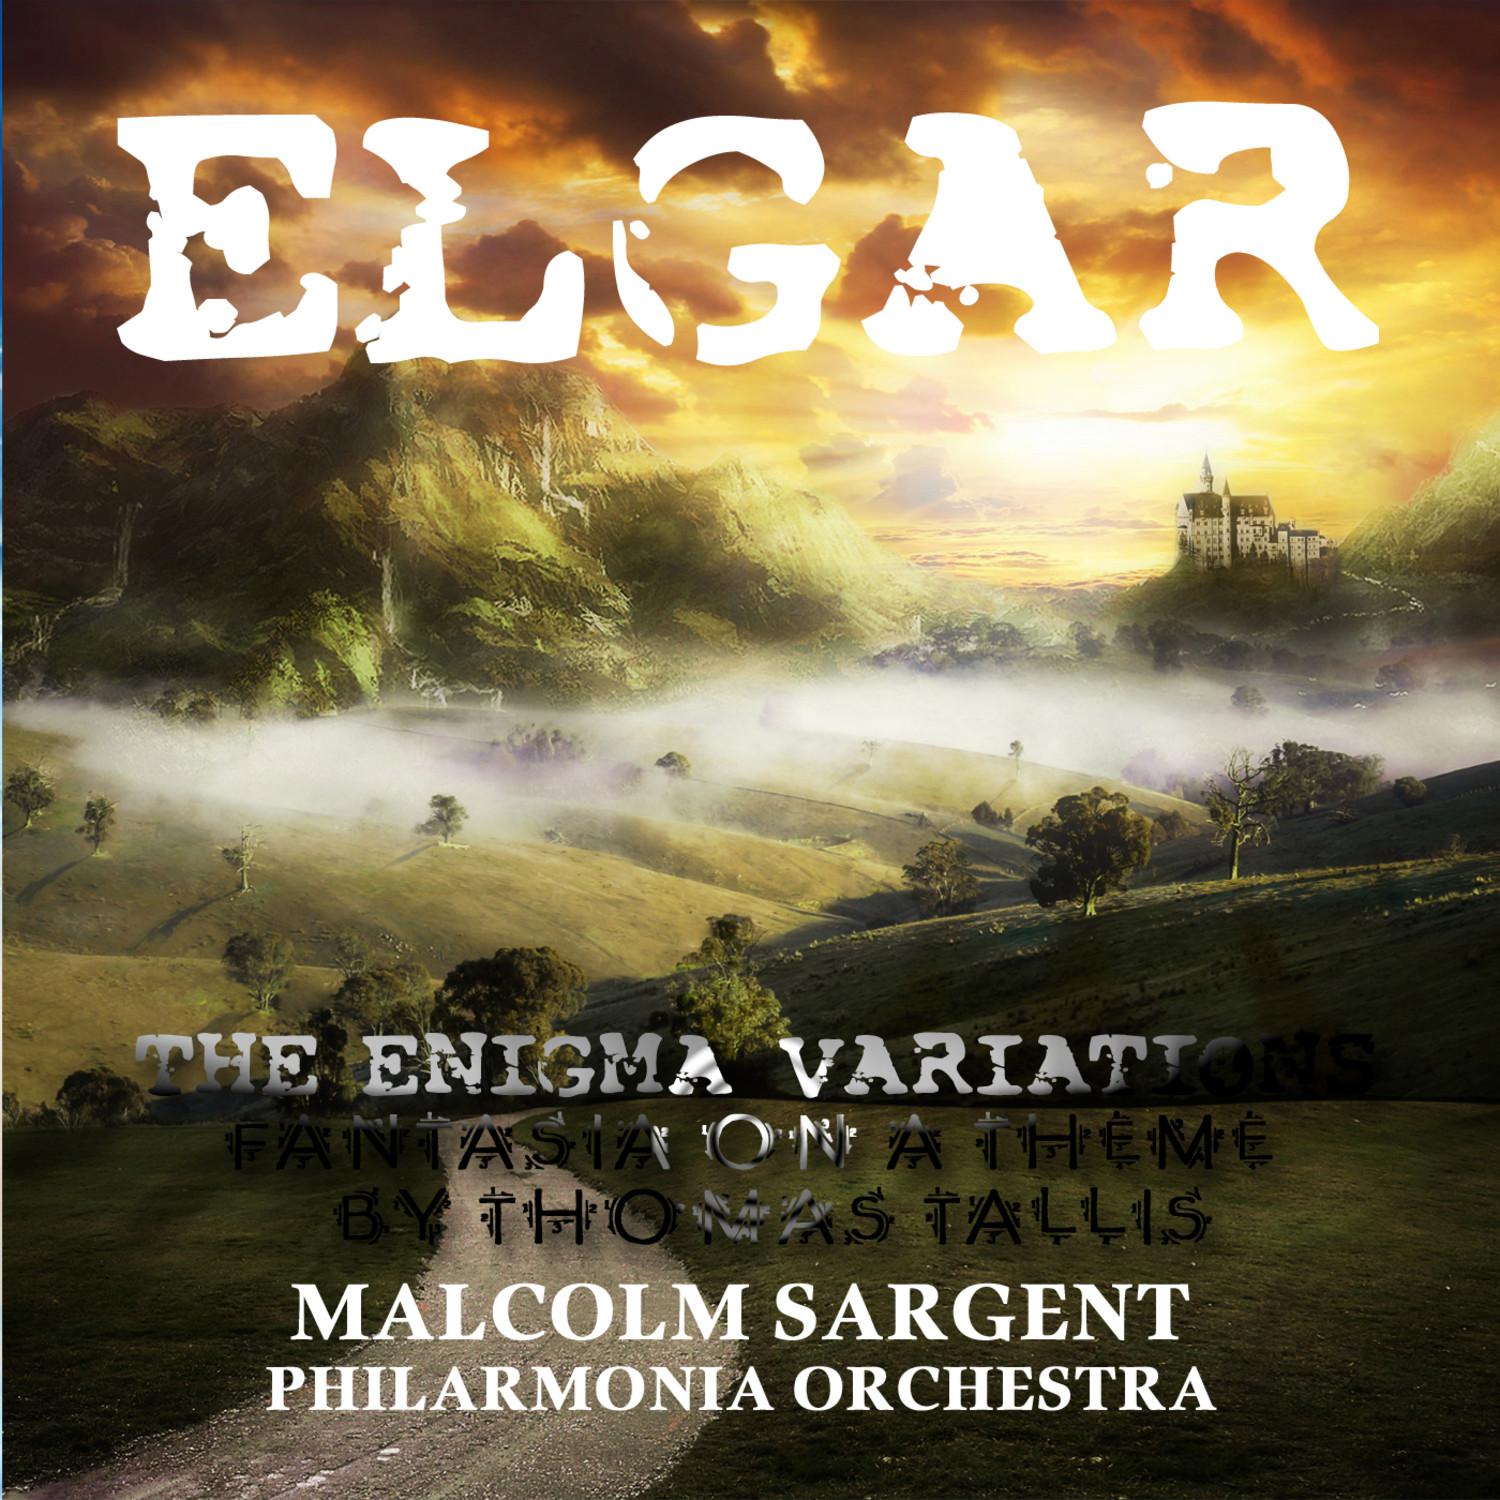 Enigma Variations: R.p.a.